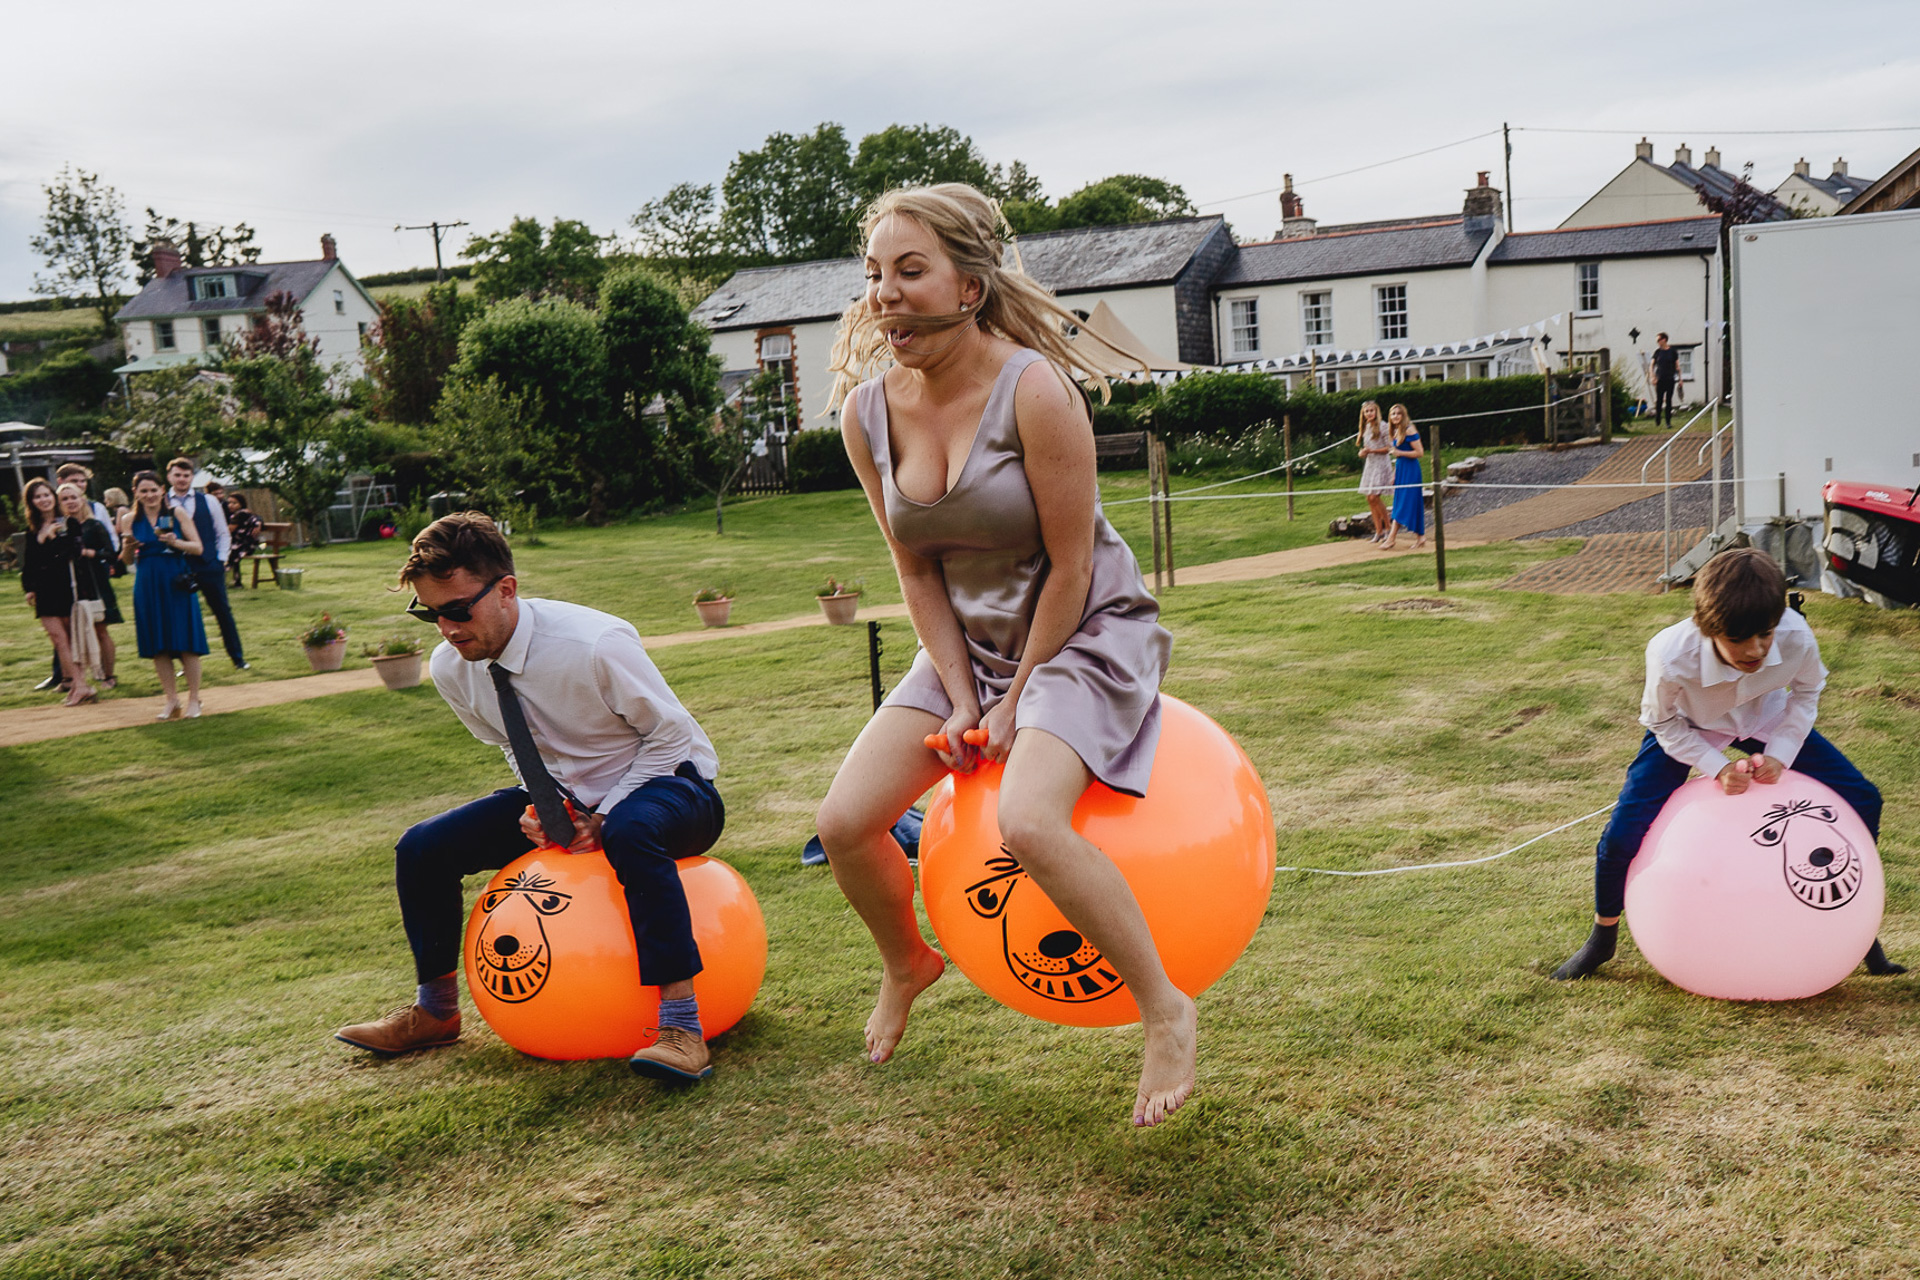 Bridesmaid and wedding guests on space hoppers